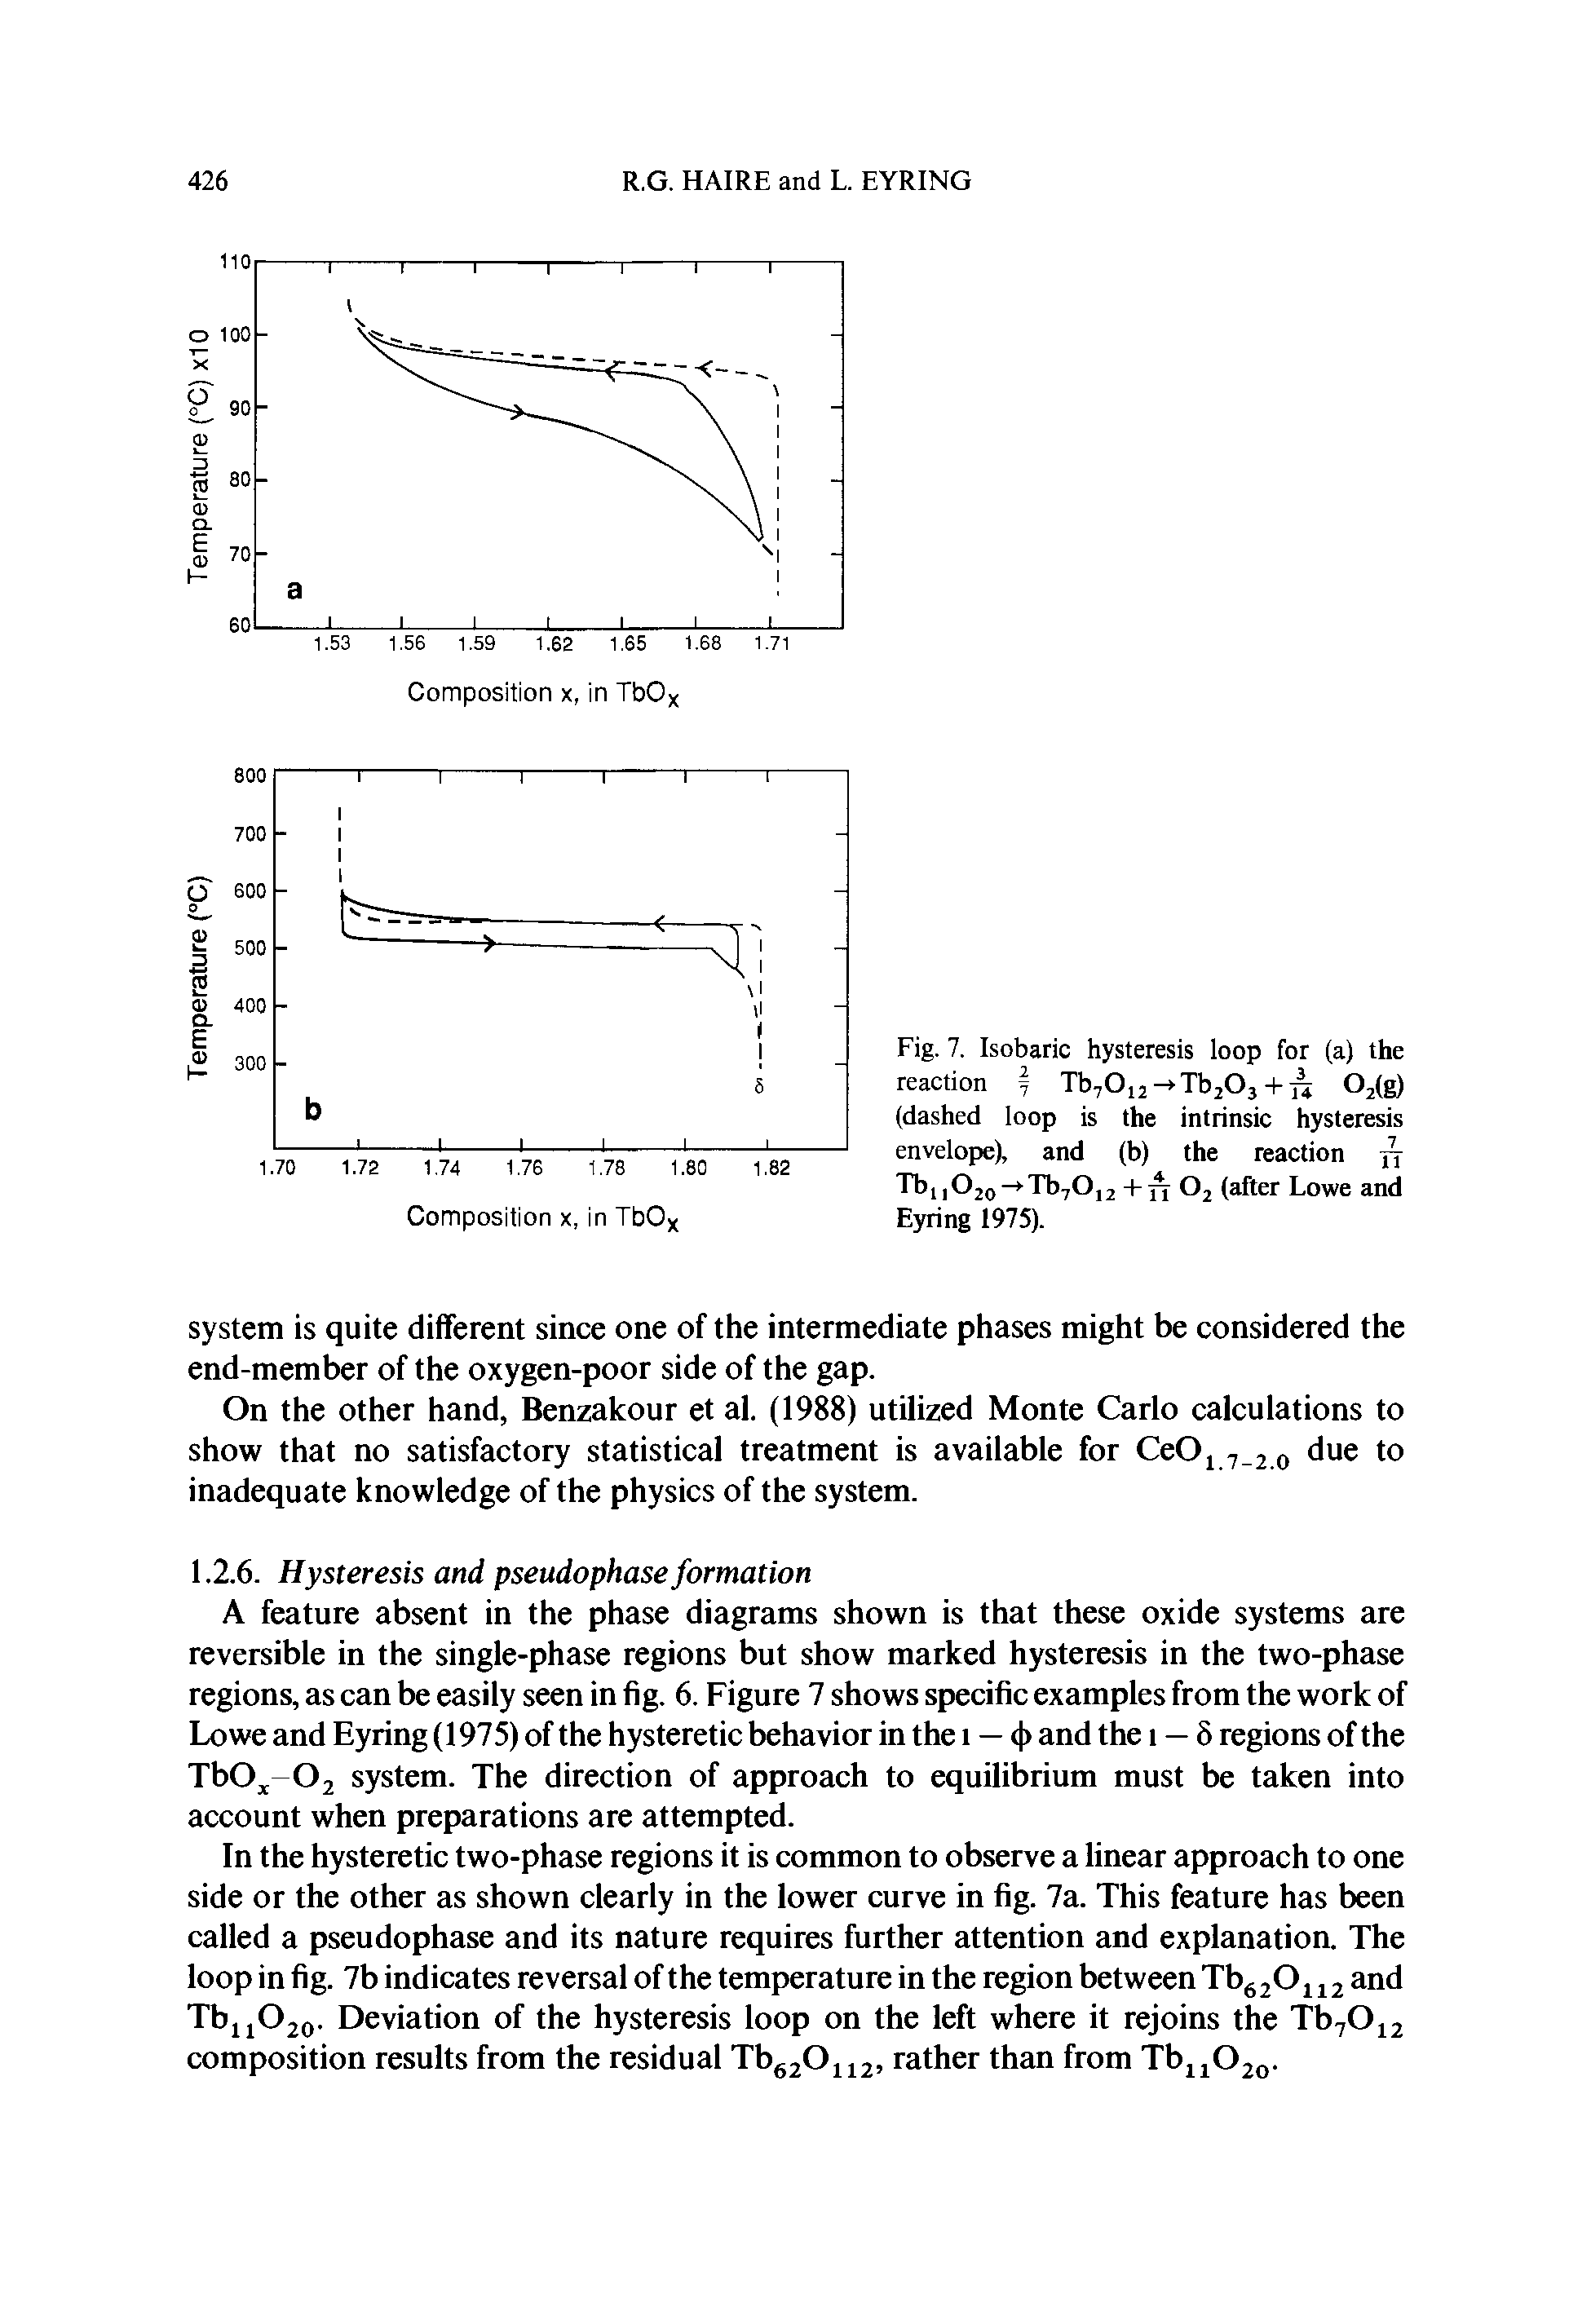 Fig. 7. Isobaric hysteresis loop for (a) the reaction f Tb70i2- Tb20j+ O fe) (dashed loop is the intrinsic hysteresis envelope), and (b) the reaction n TbiiO20 Tb7Oi2 +n O2 (after Lowe and Eyring 1975).